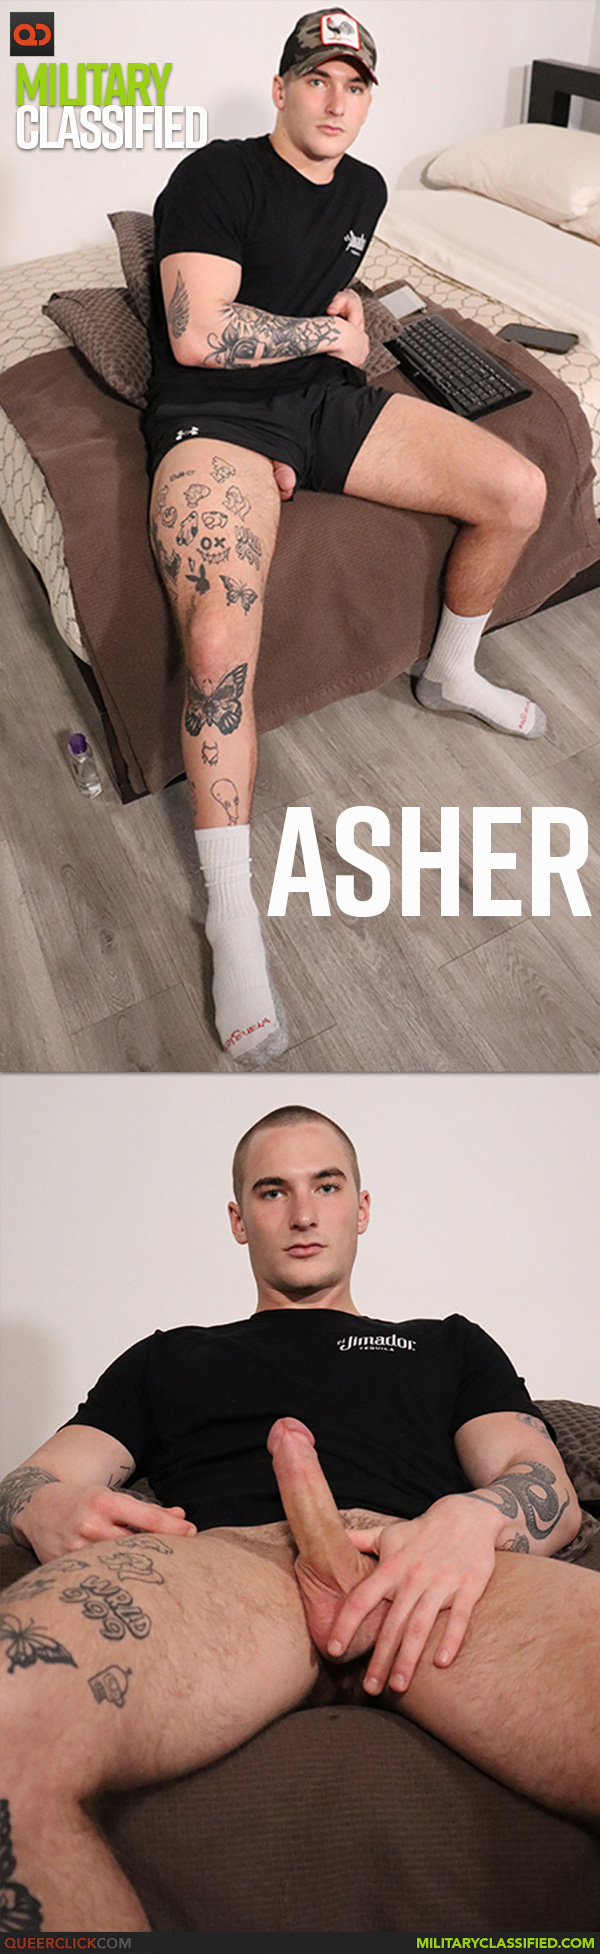 Military Classified: Asher